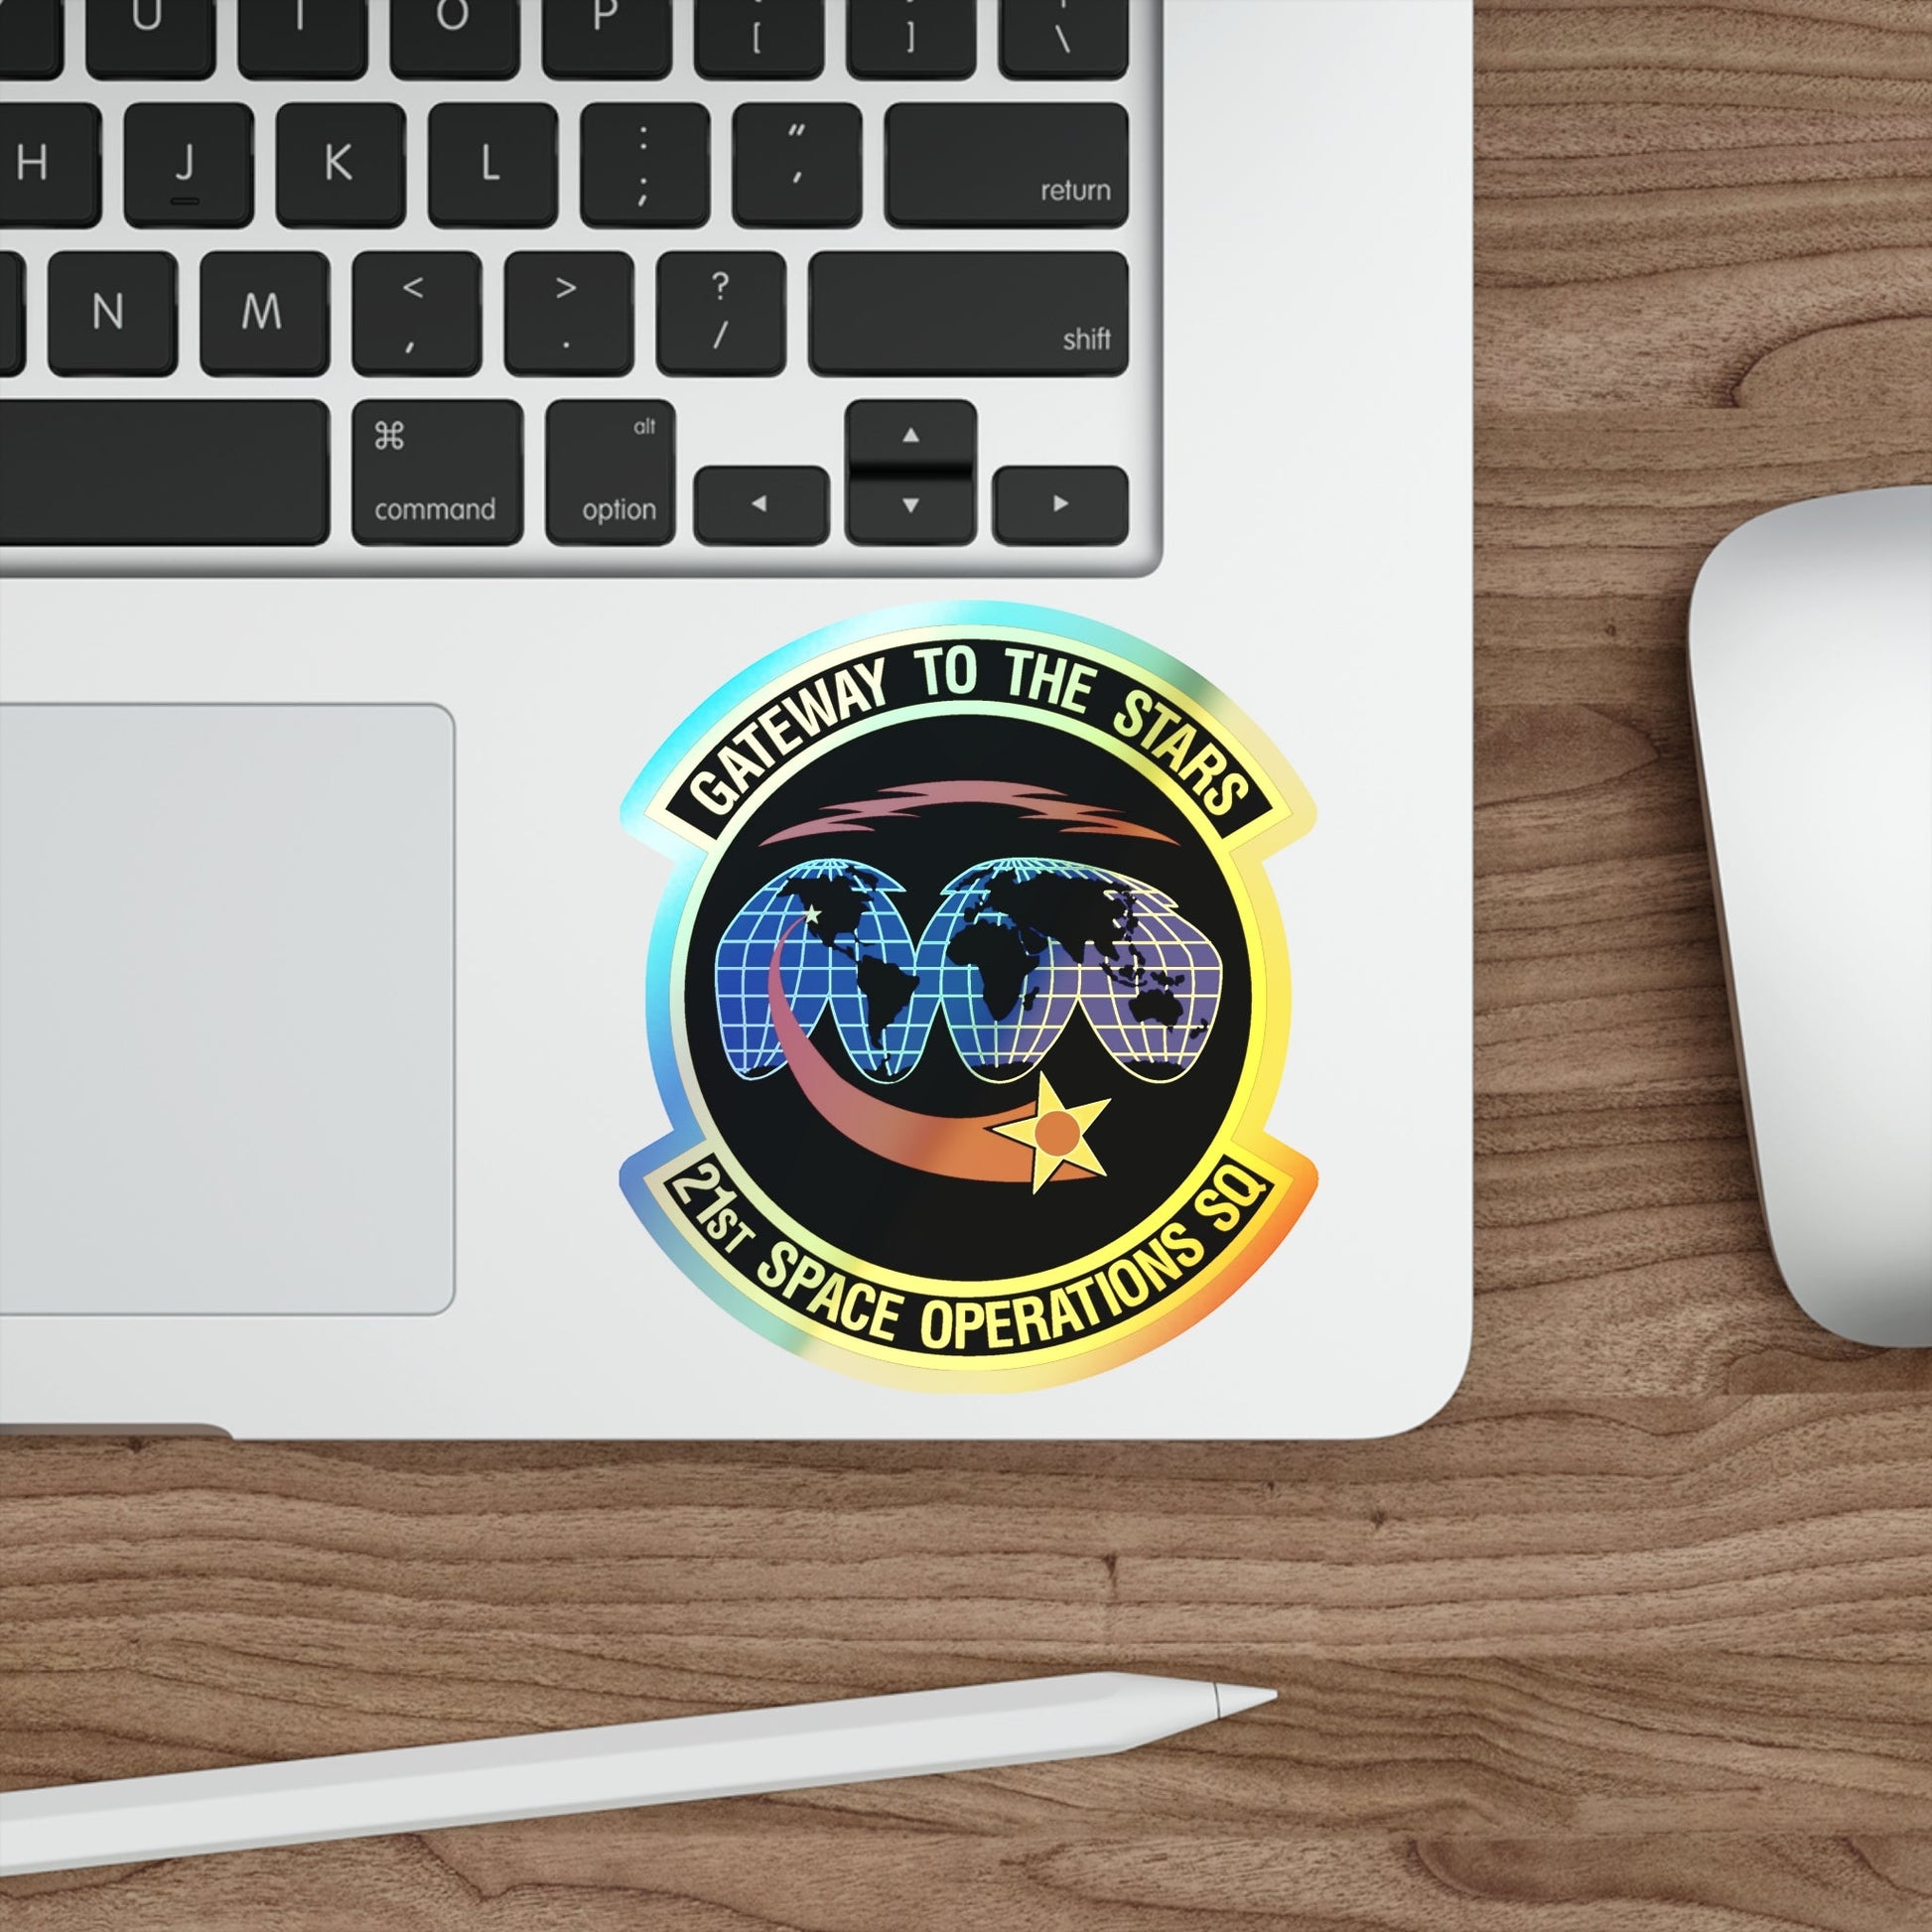 21st Space Operations Squadron (U.S. Air Force) Holographic STICKER Die-Cut Vinyl Decal-The Sticker Space